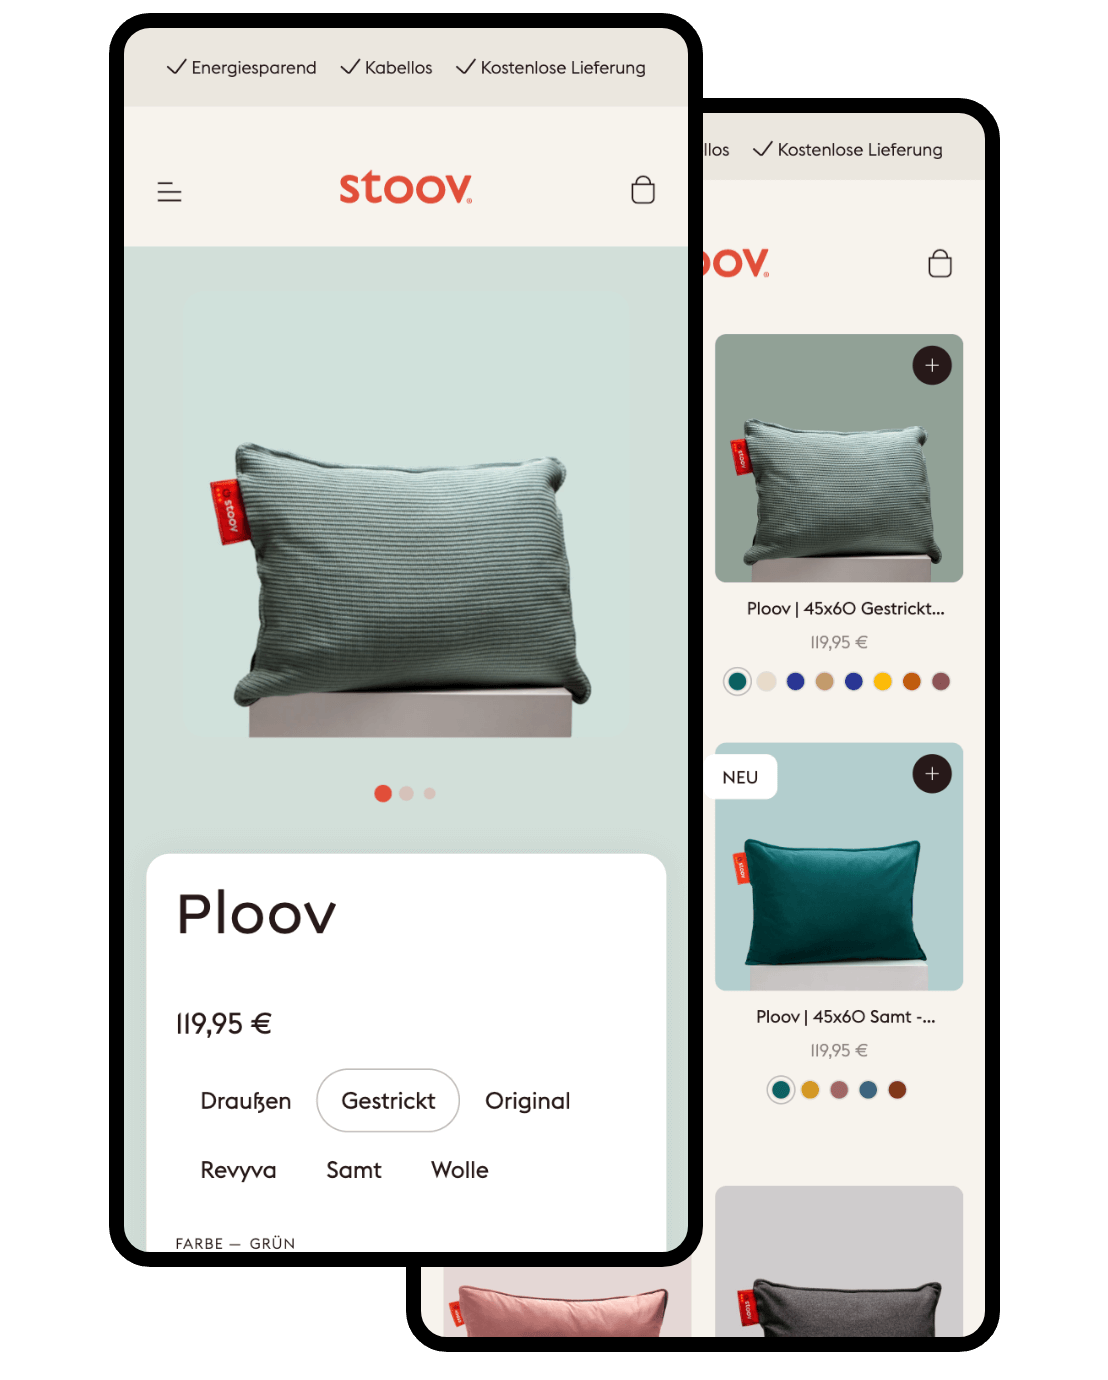 Stoov products | Code